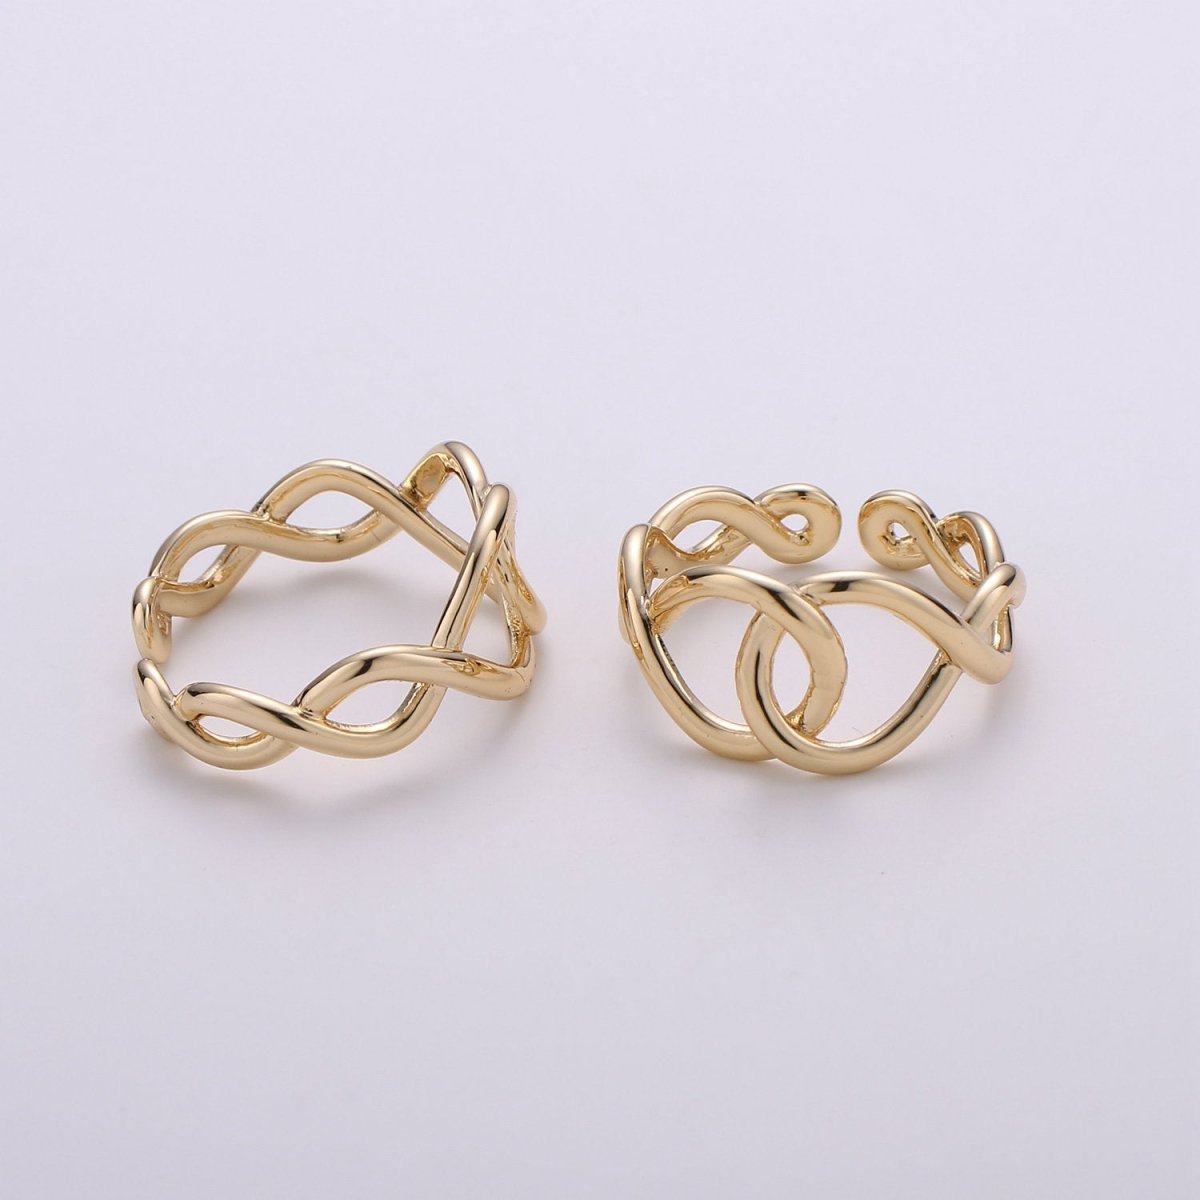 Adjustable Ring Eternity Infinity Braided Crisscross Band Ring Gold plated over Silver for Statement Ring Stack Ring - DLUXCA